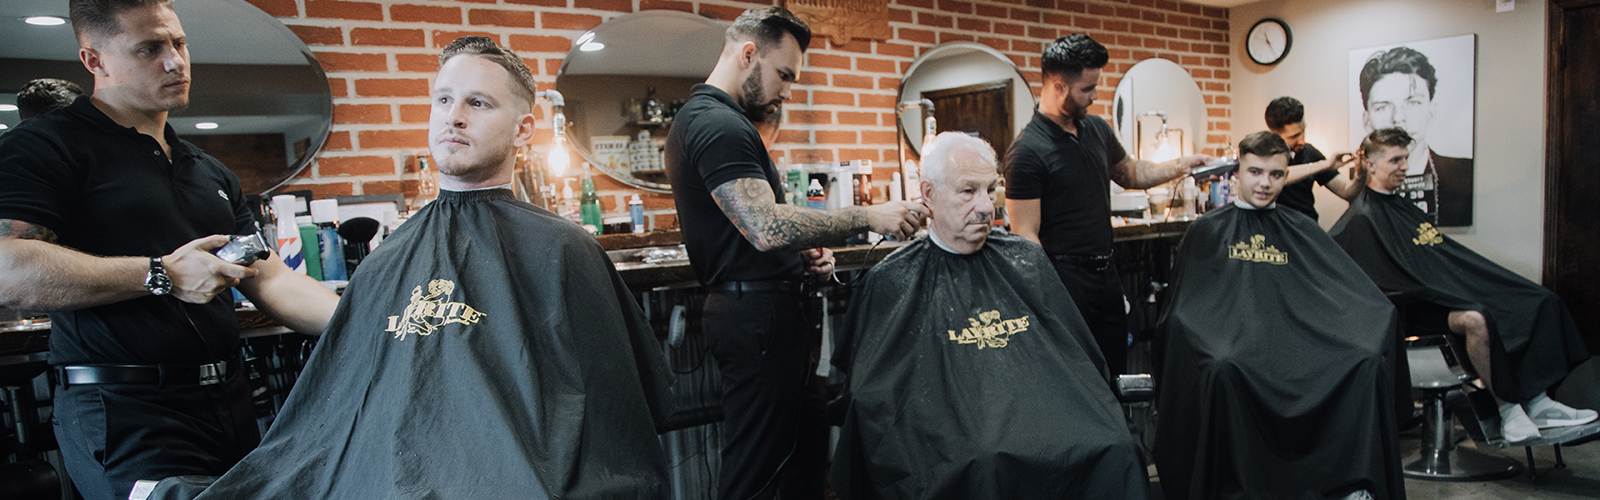 At Jonny the Barber, the clients and their barbers are a "brotherhood."